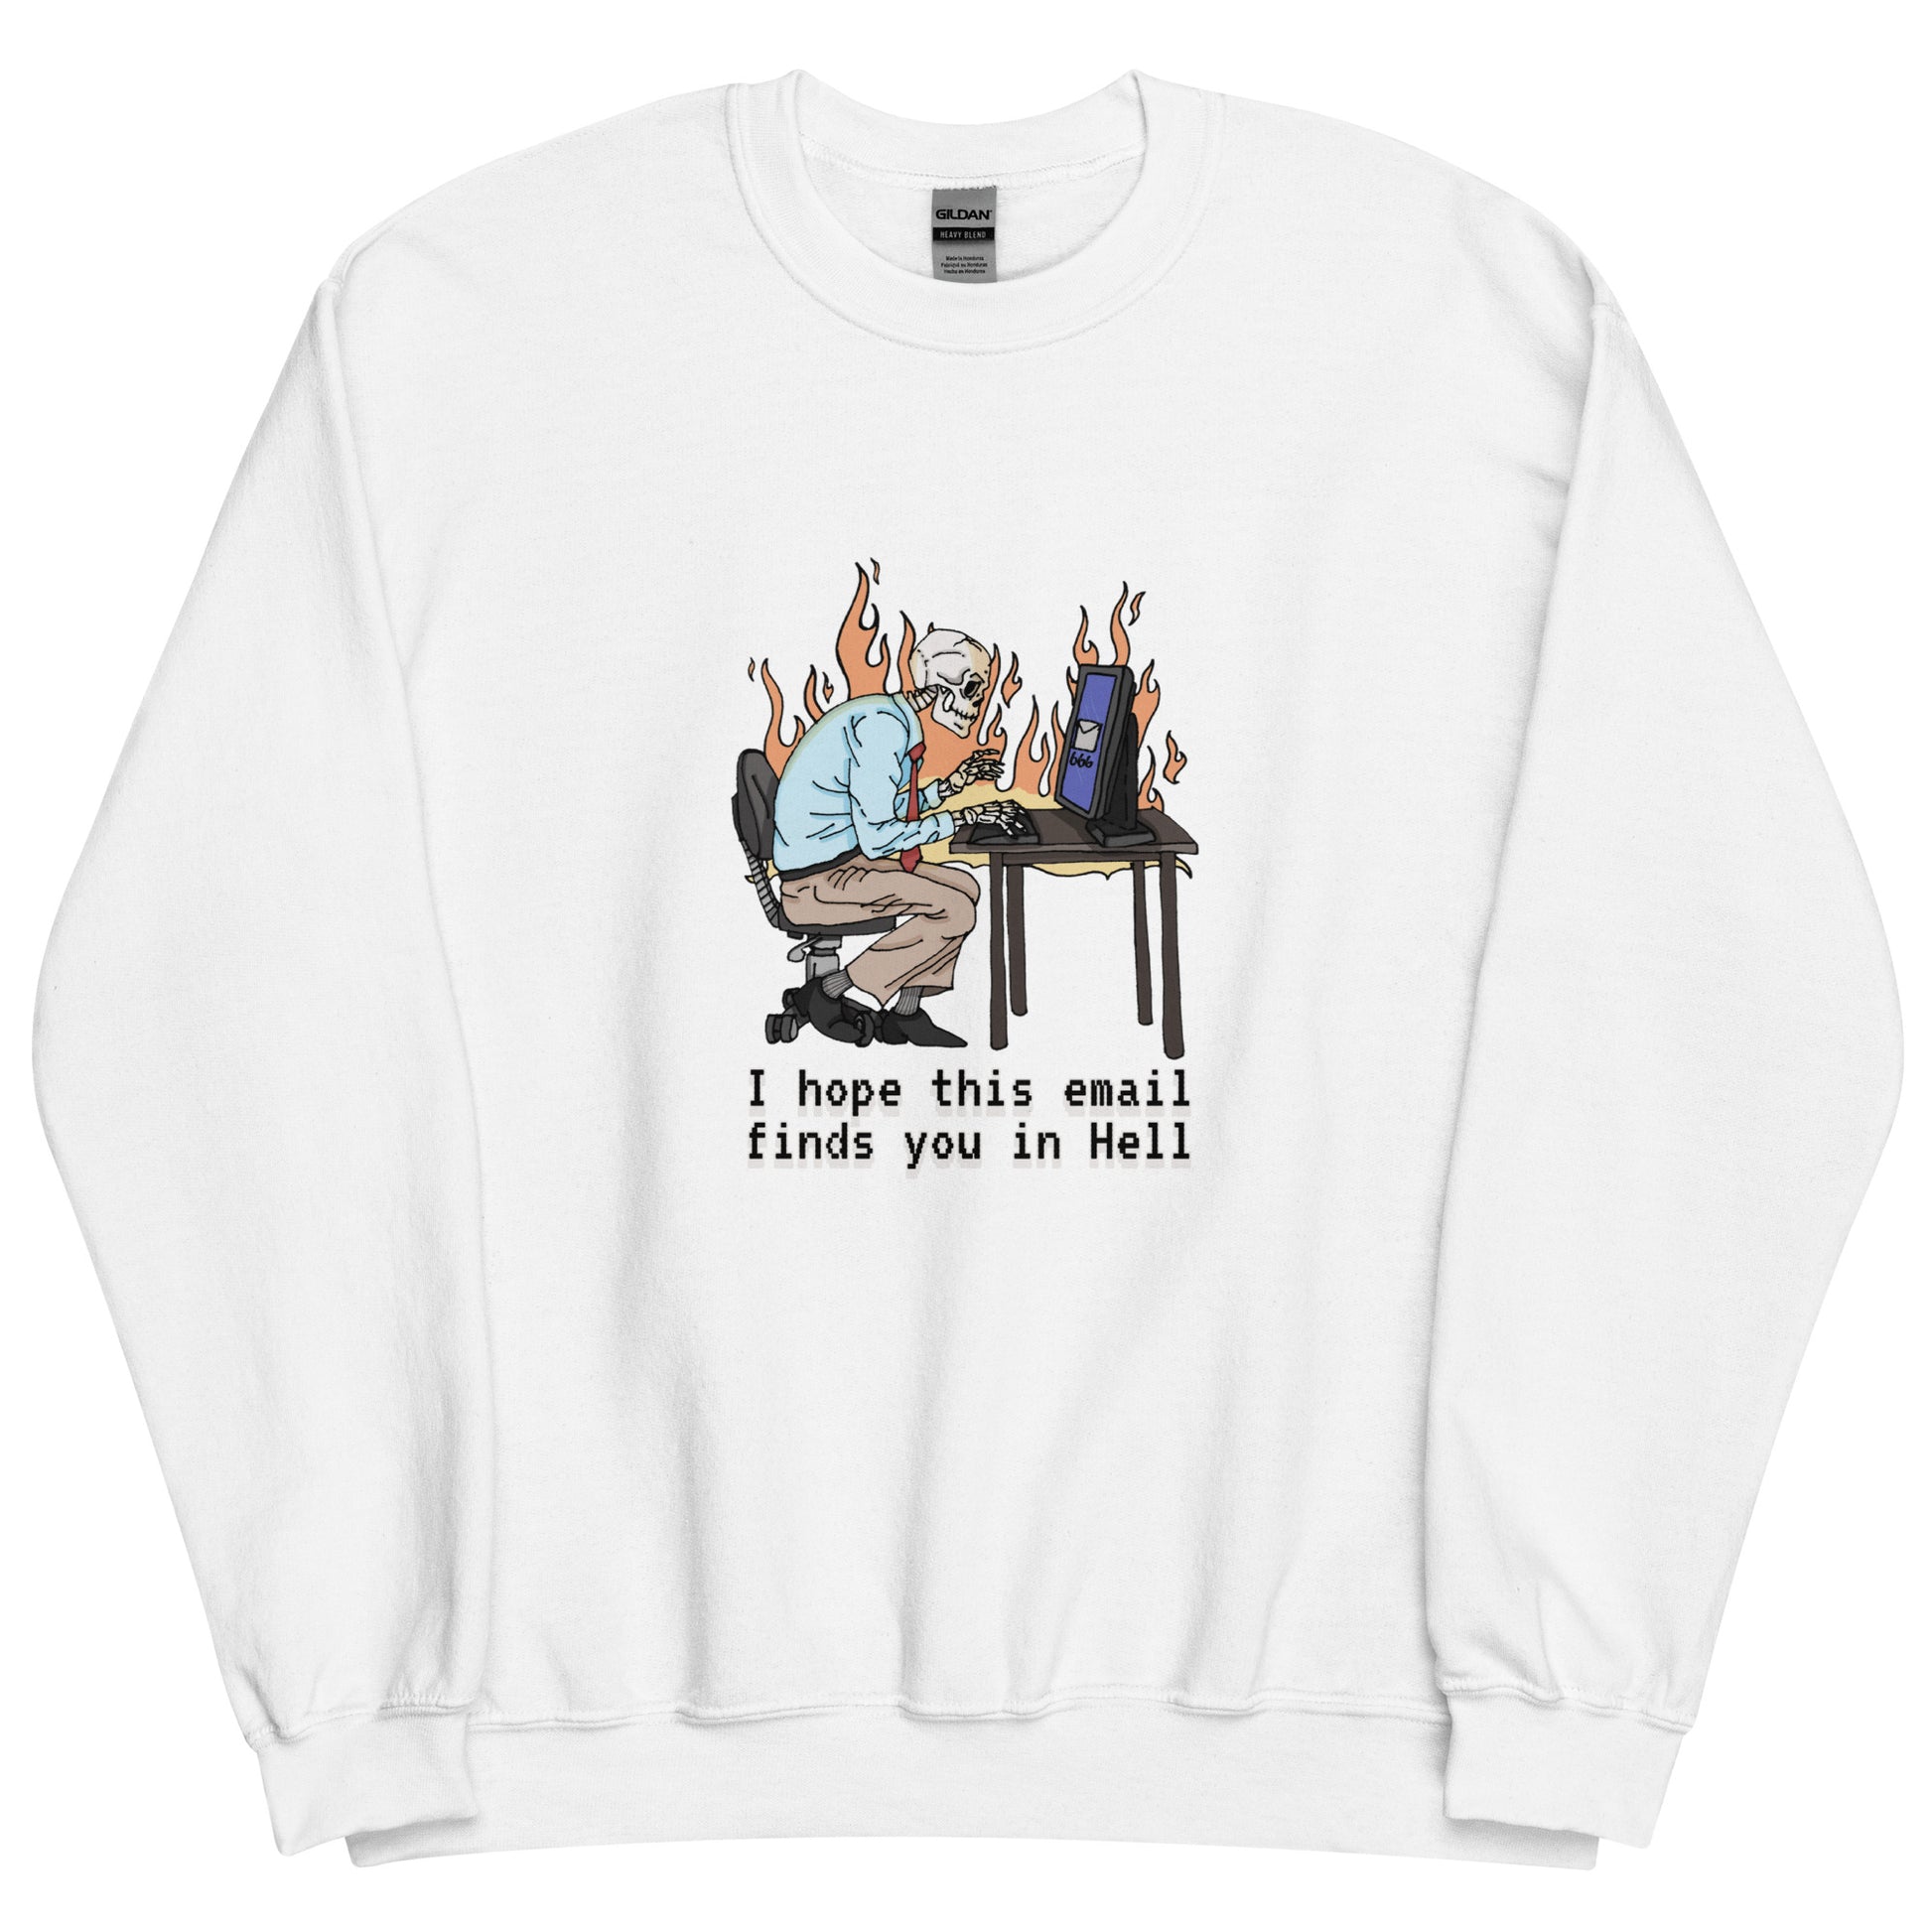 i hope this emails finds you in hell sweatshirt in white - gaslit apparel